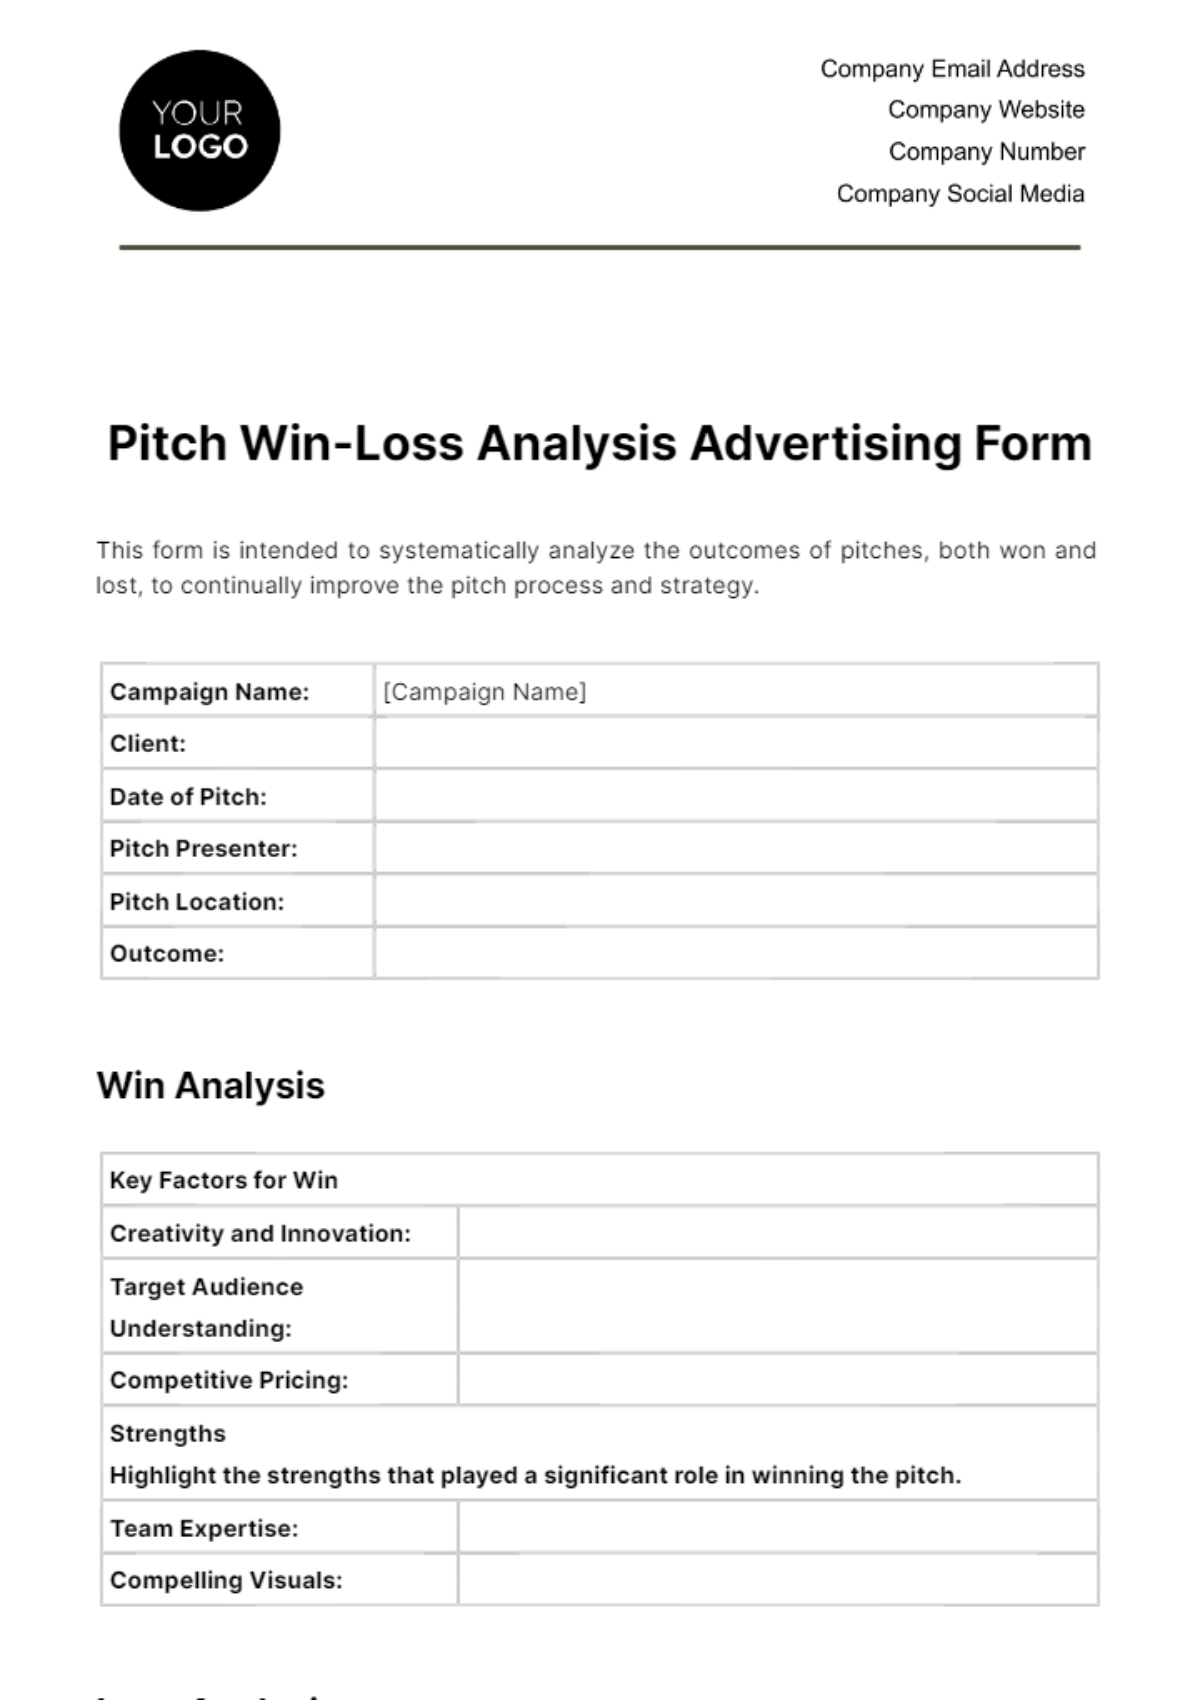 Free Pitch Win-Loss Analysis Advertising Form Template